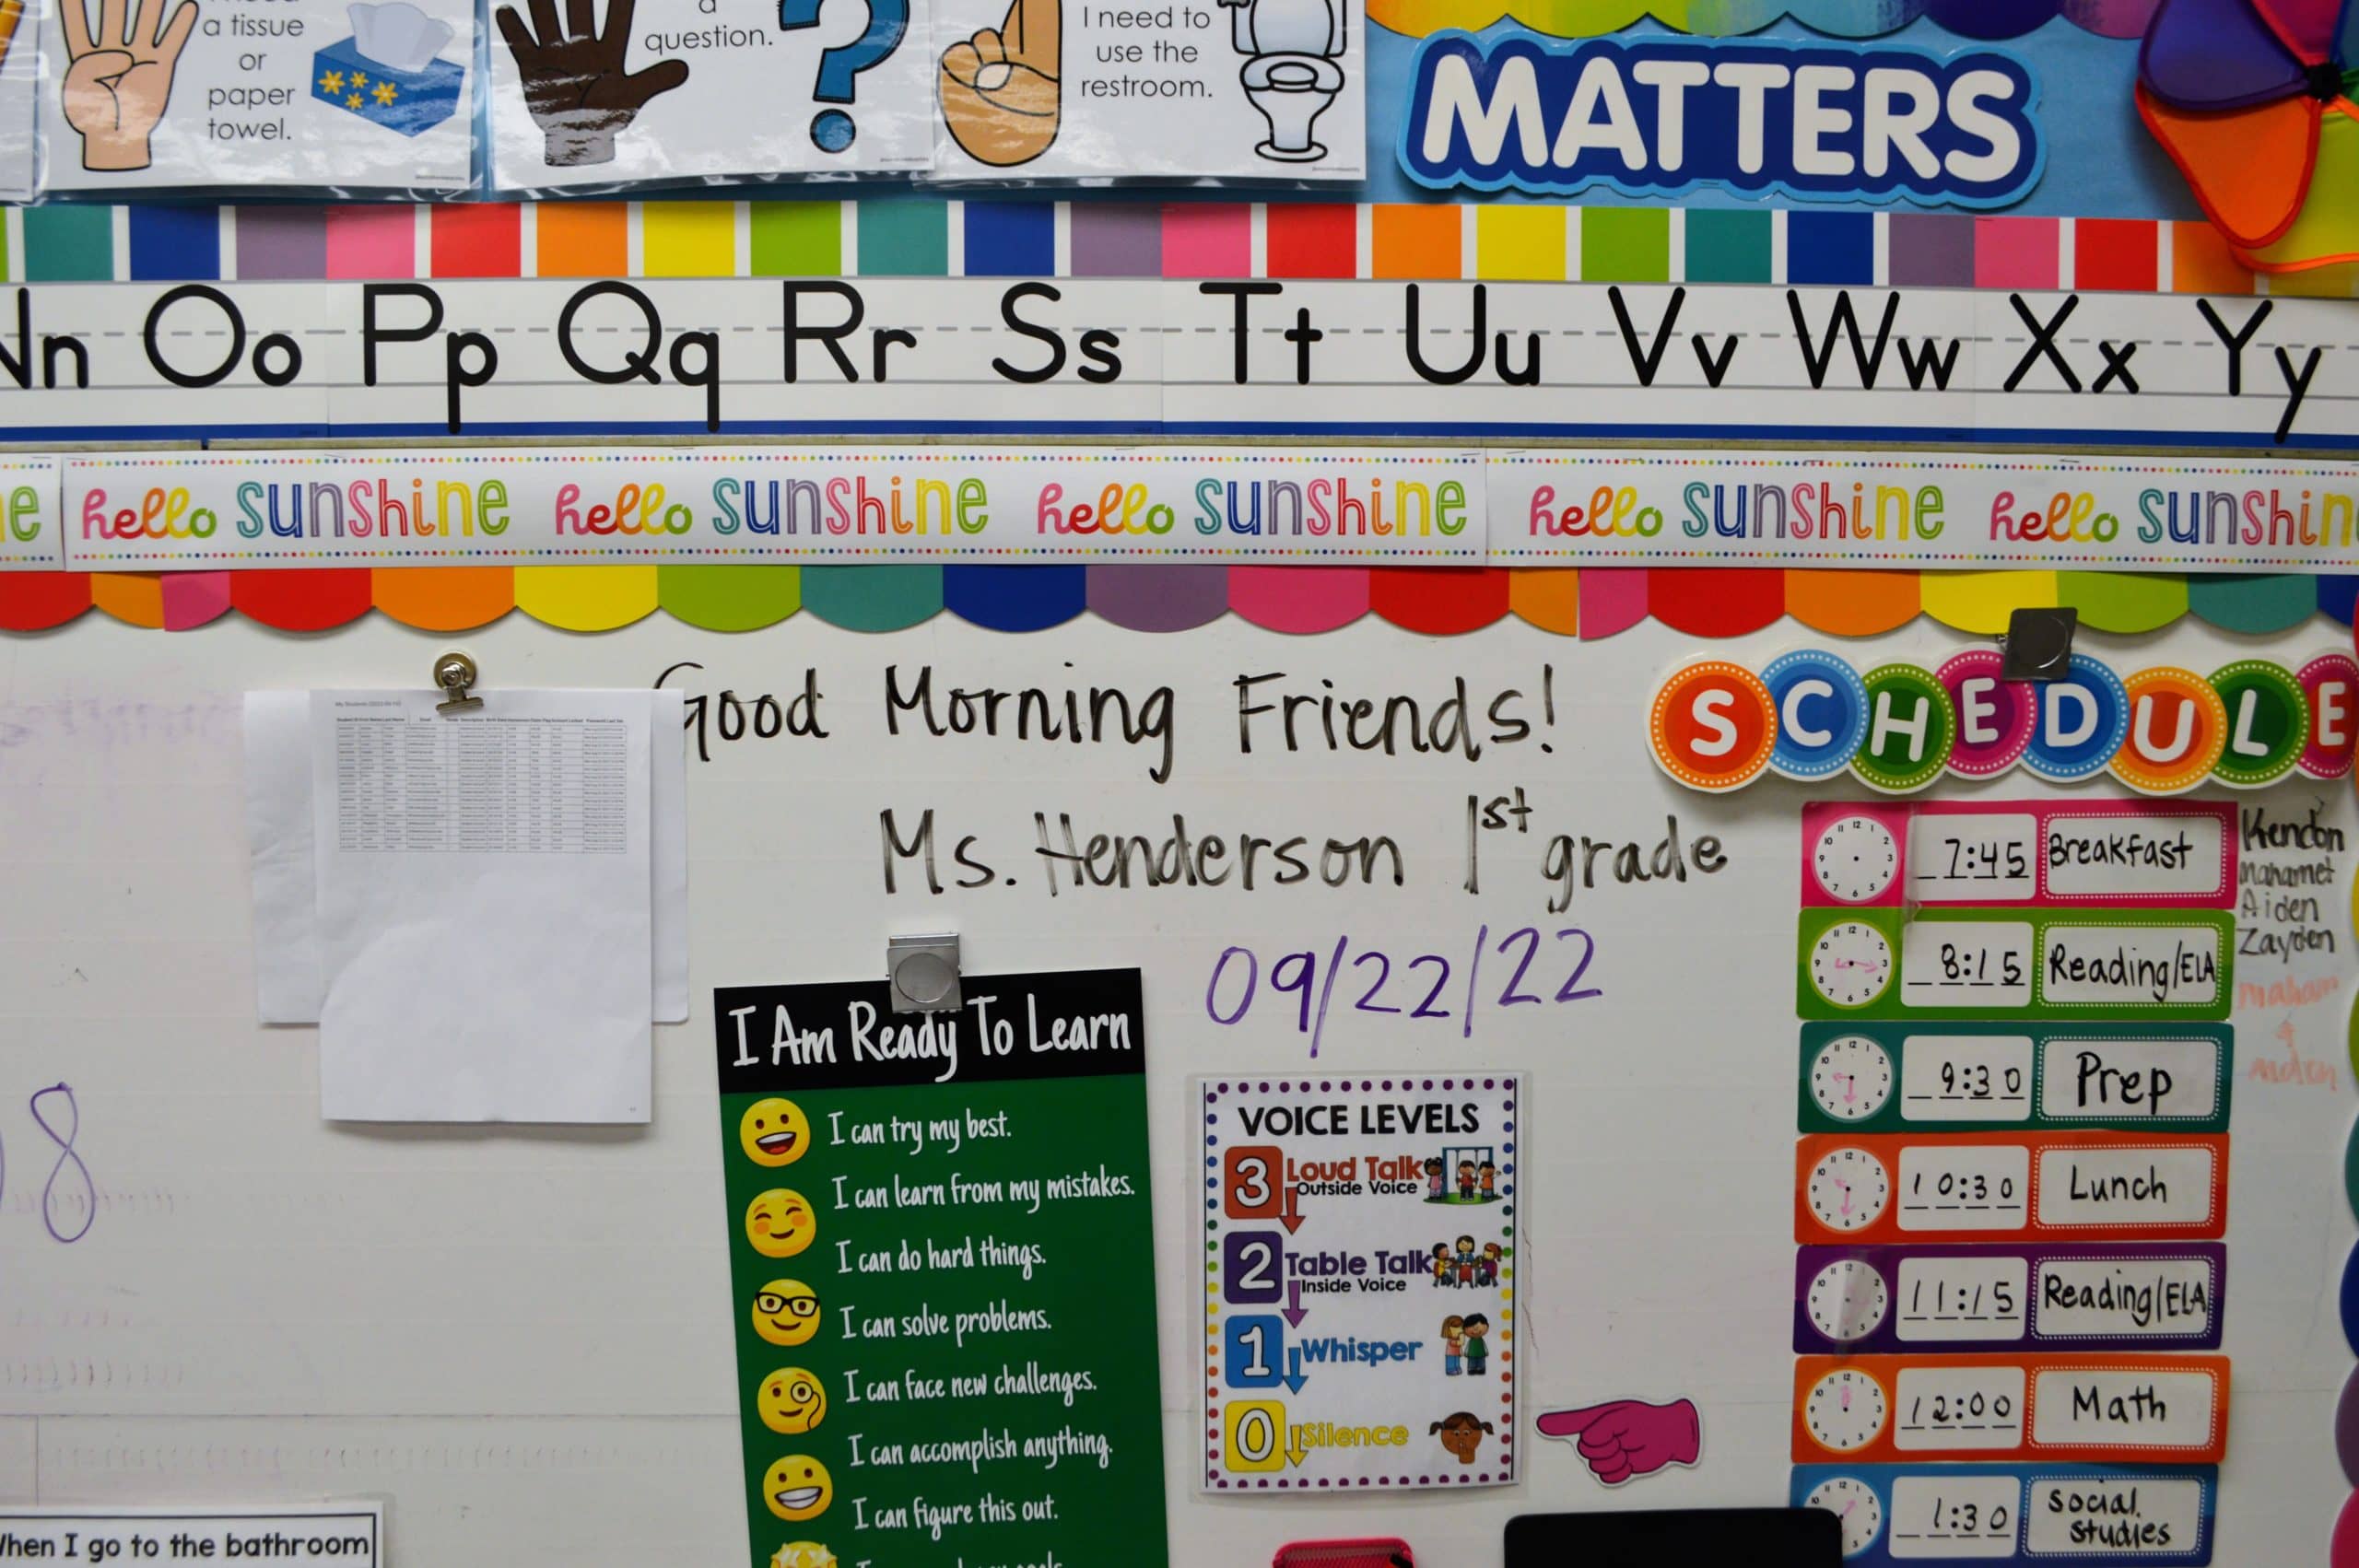 image of Ms. Henderson's white board